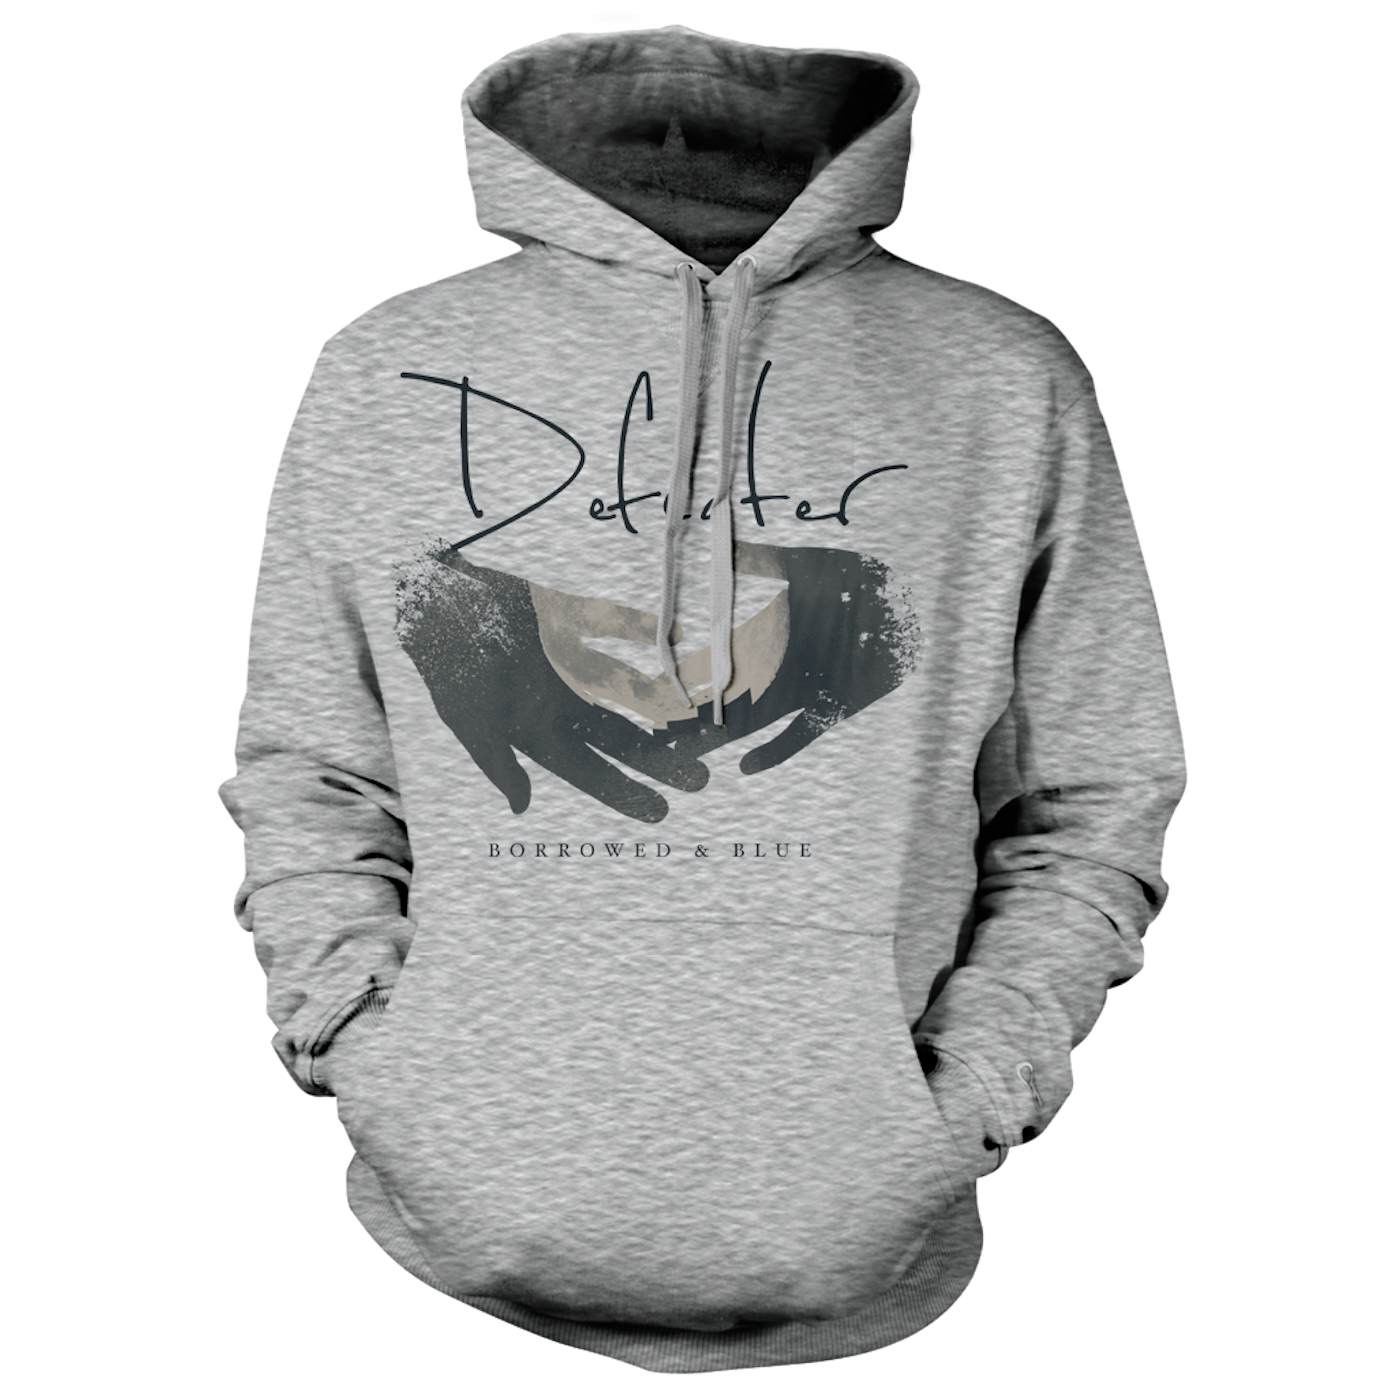 Defeater Borrowed Blue Pullover Hoodie